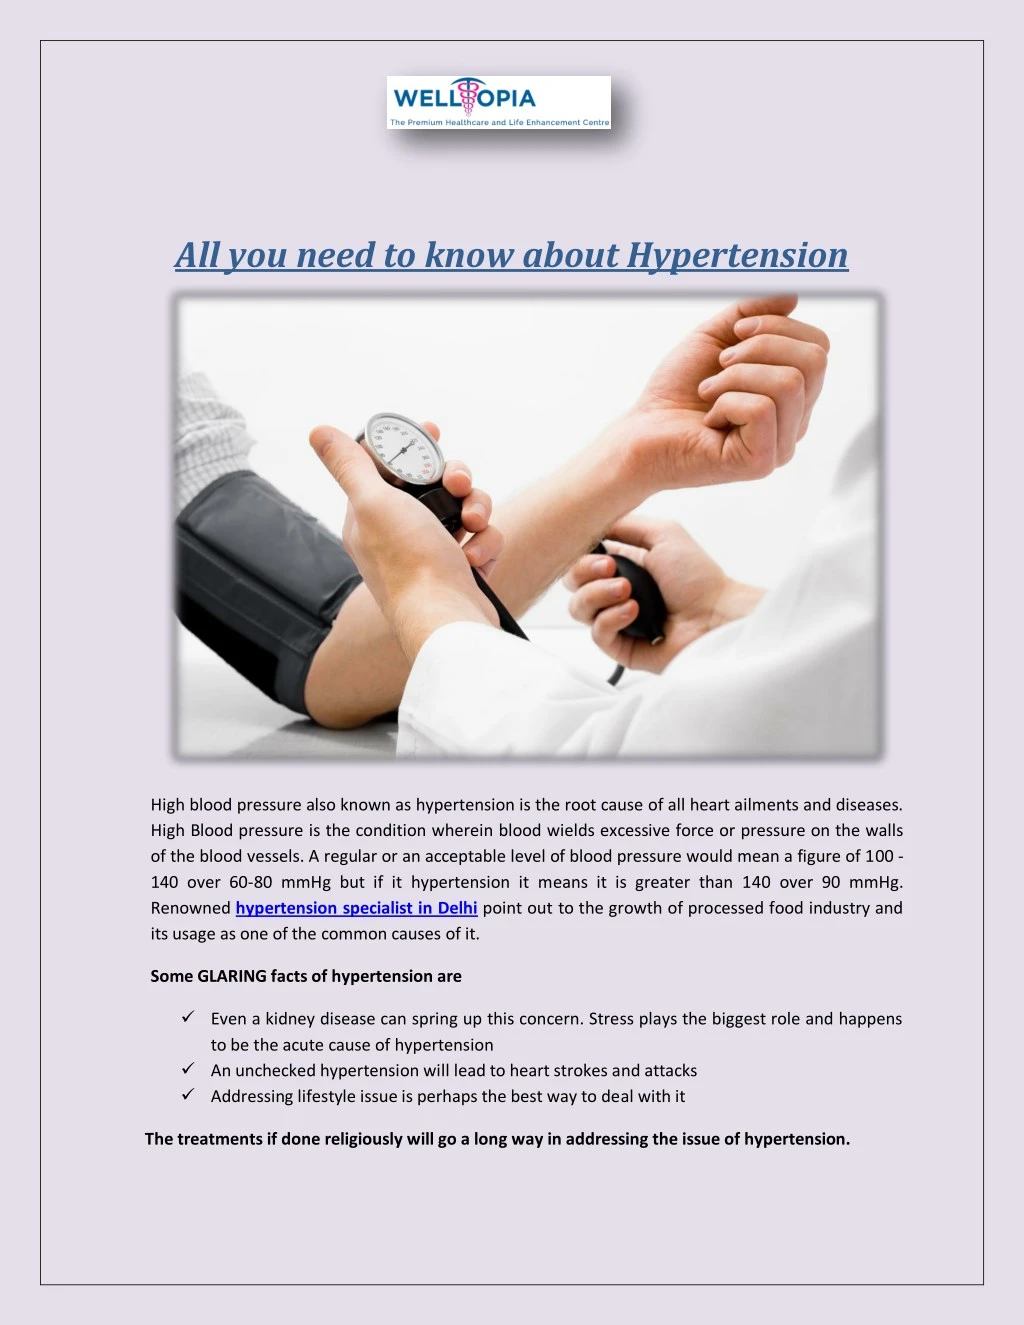 all you need to know about hypertension